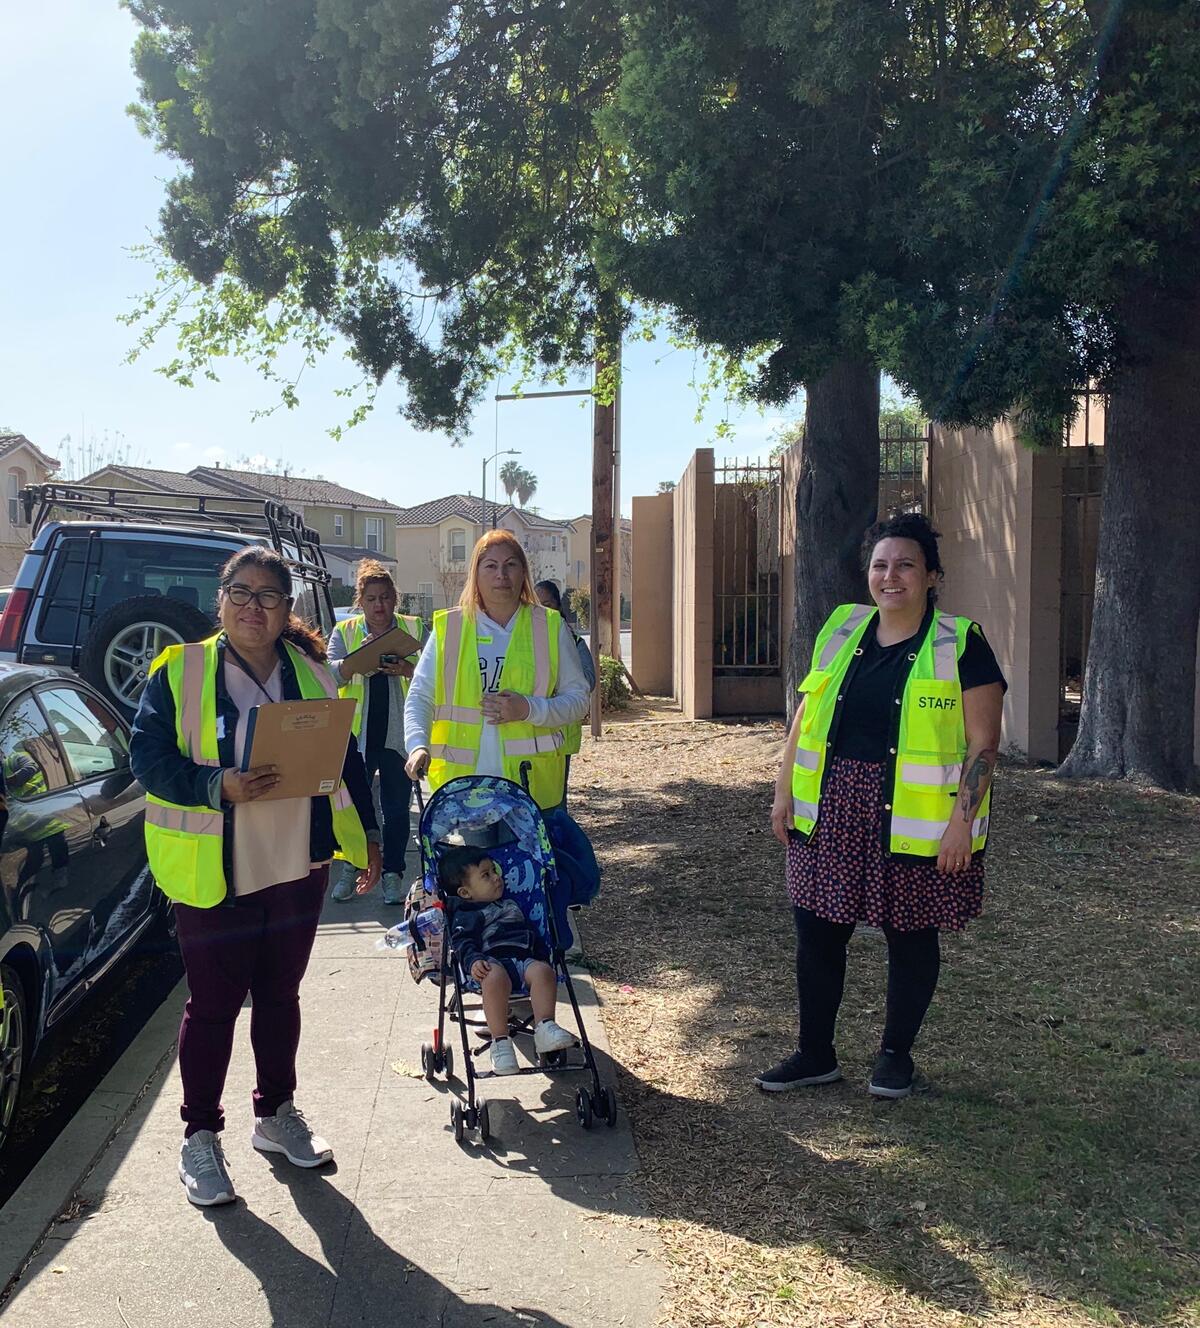 A group of people wearing high visibility vests are pictured during a walking audit, there is a child in a stroller in the middle of the photo